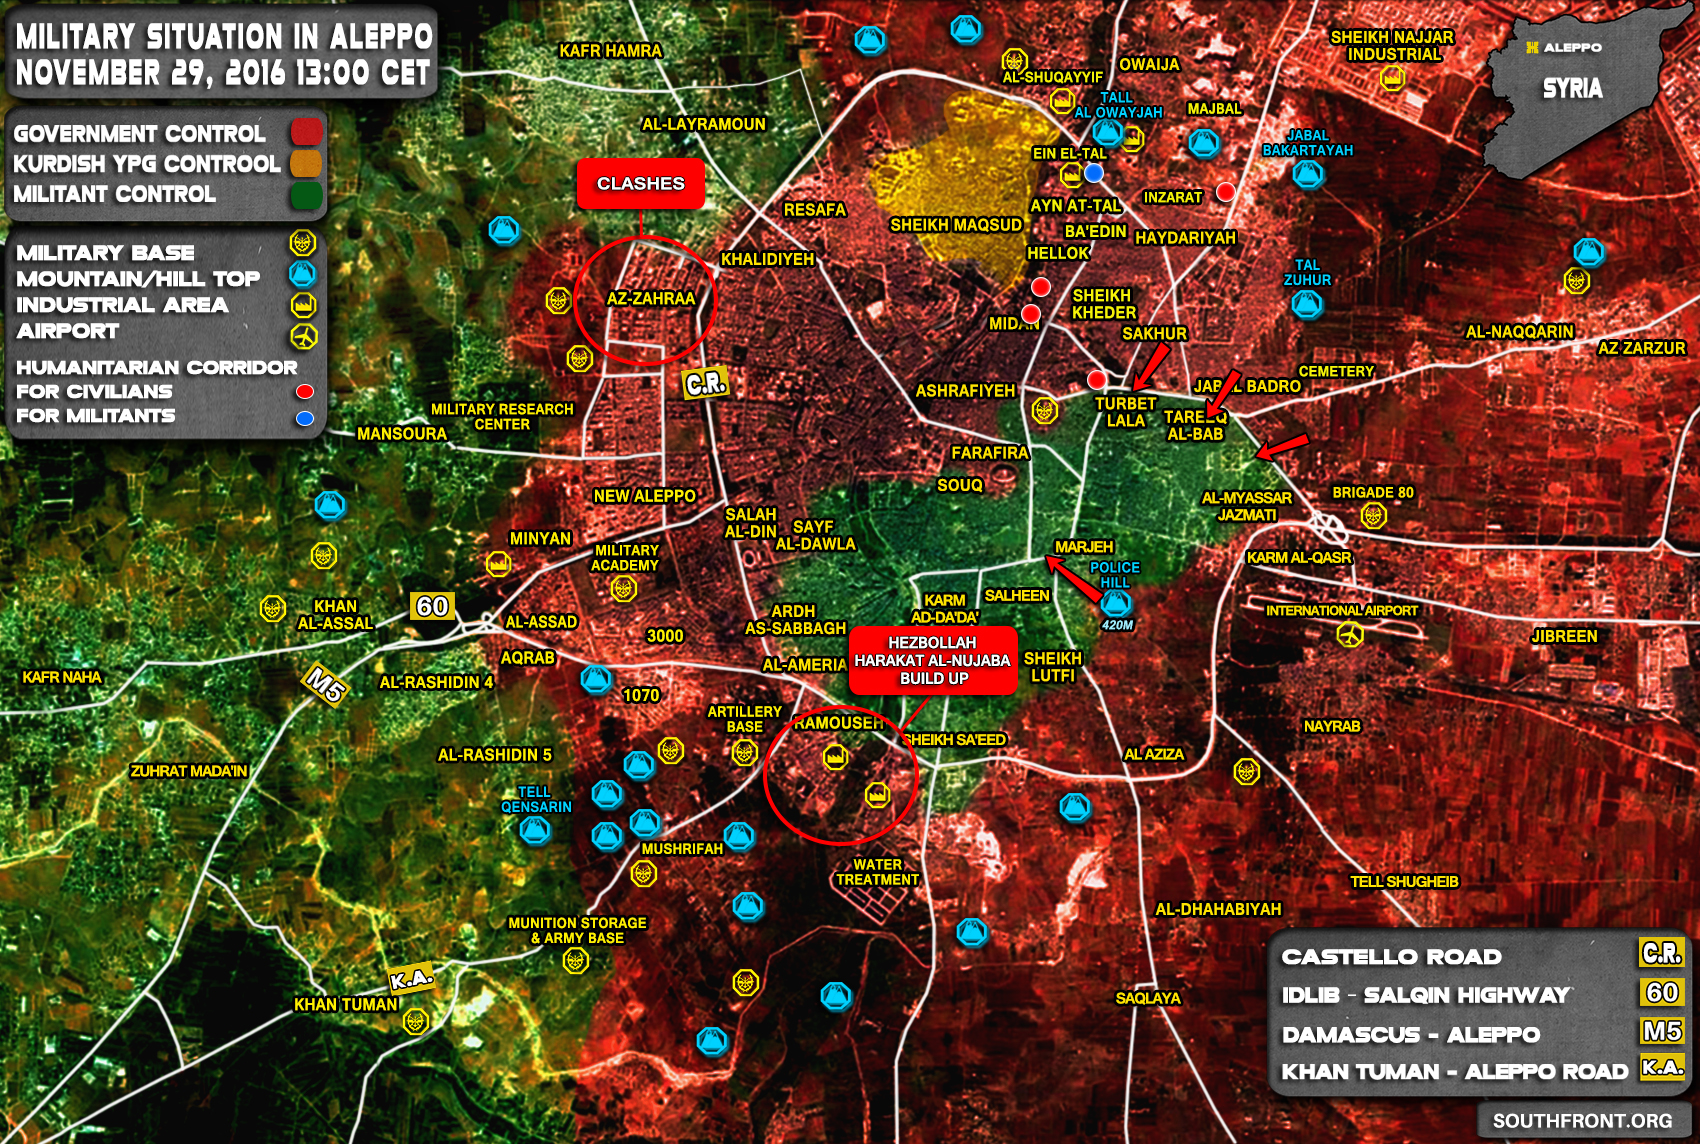 Overview of Military Situation in Aleppo City on November 29, 2016